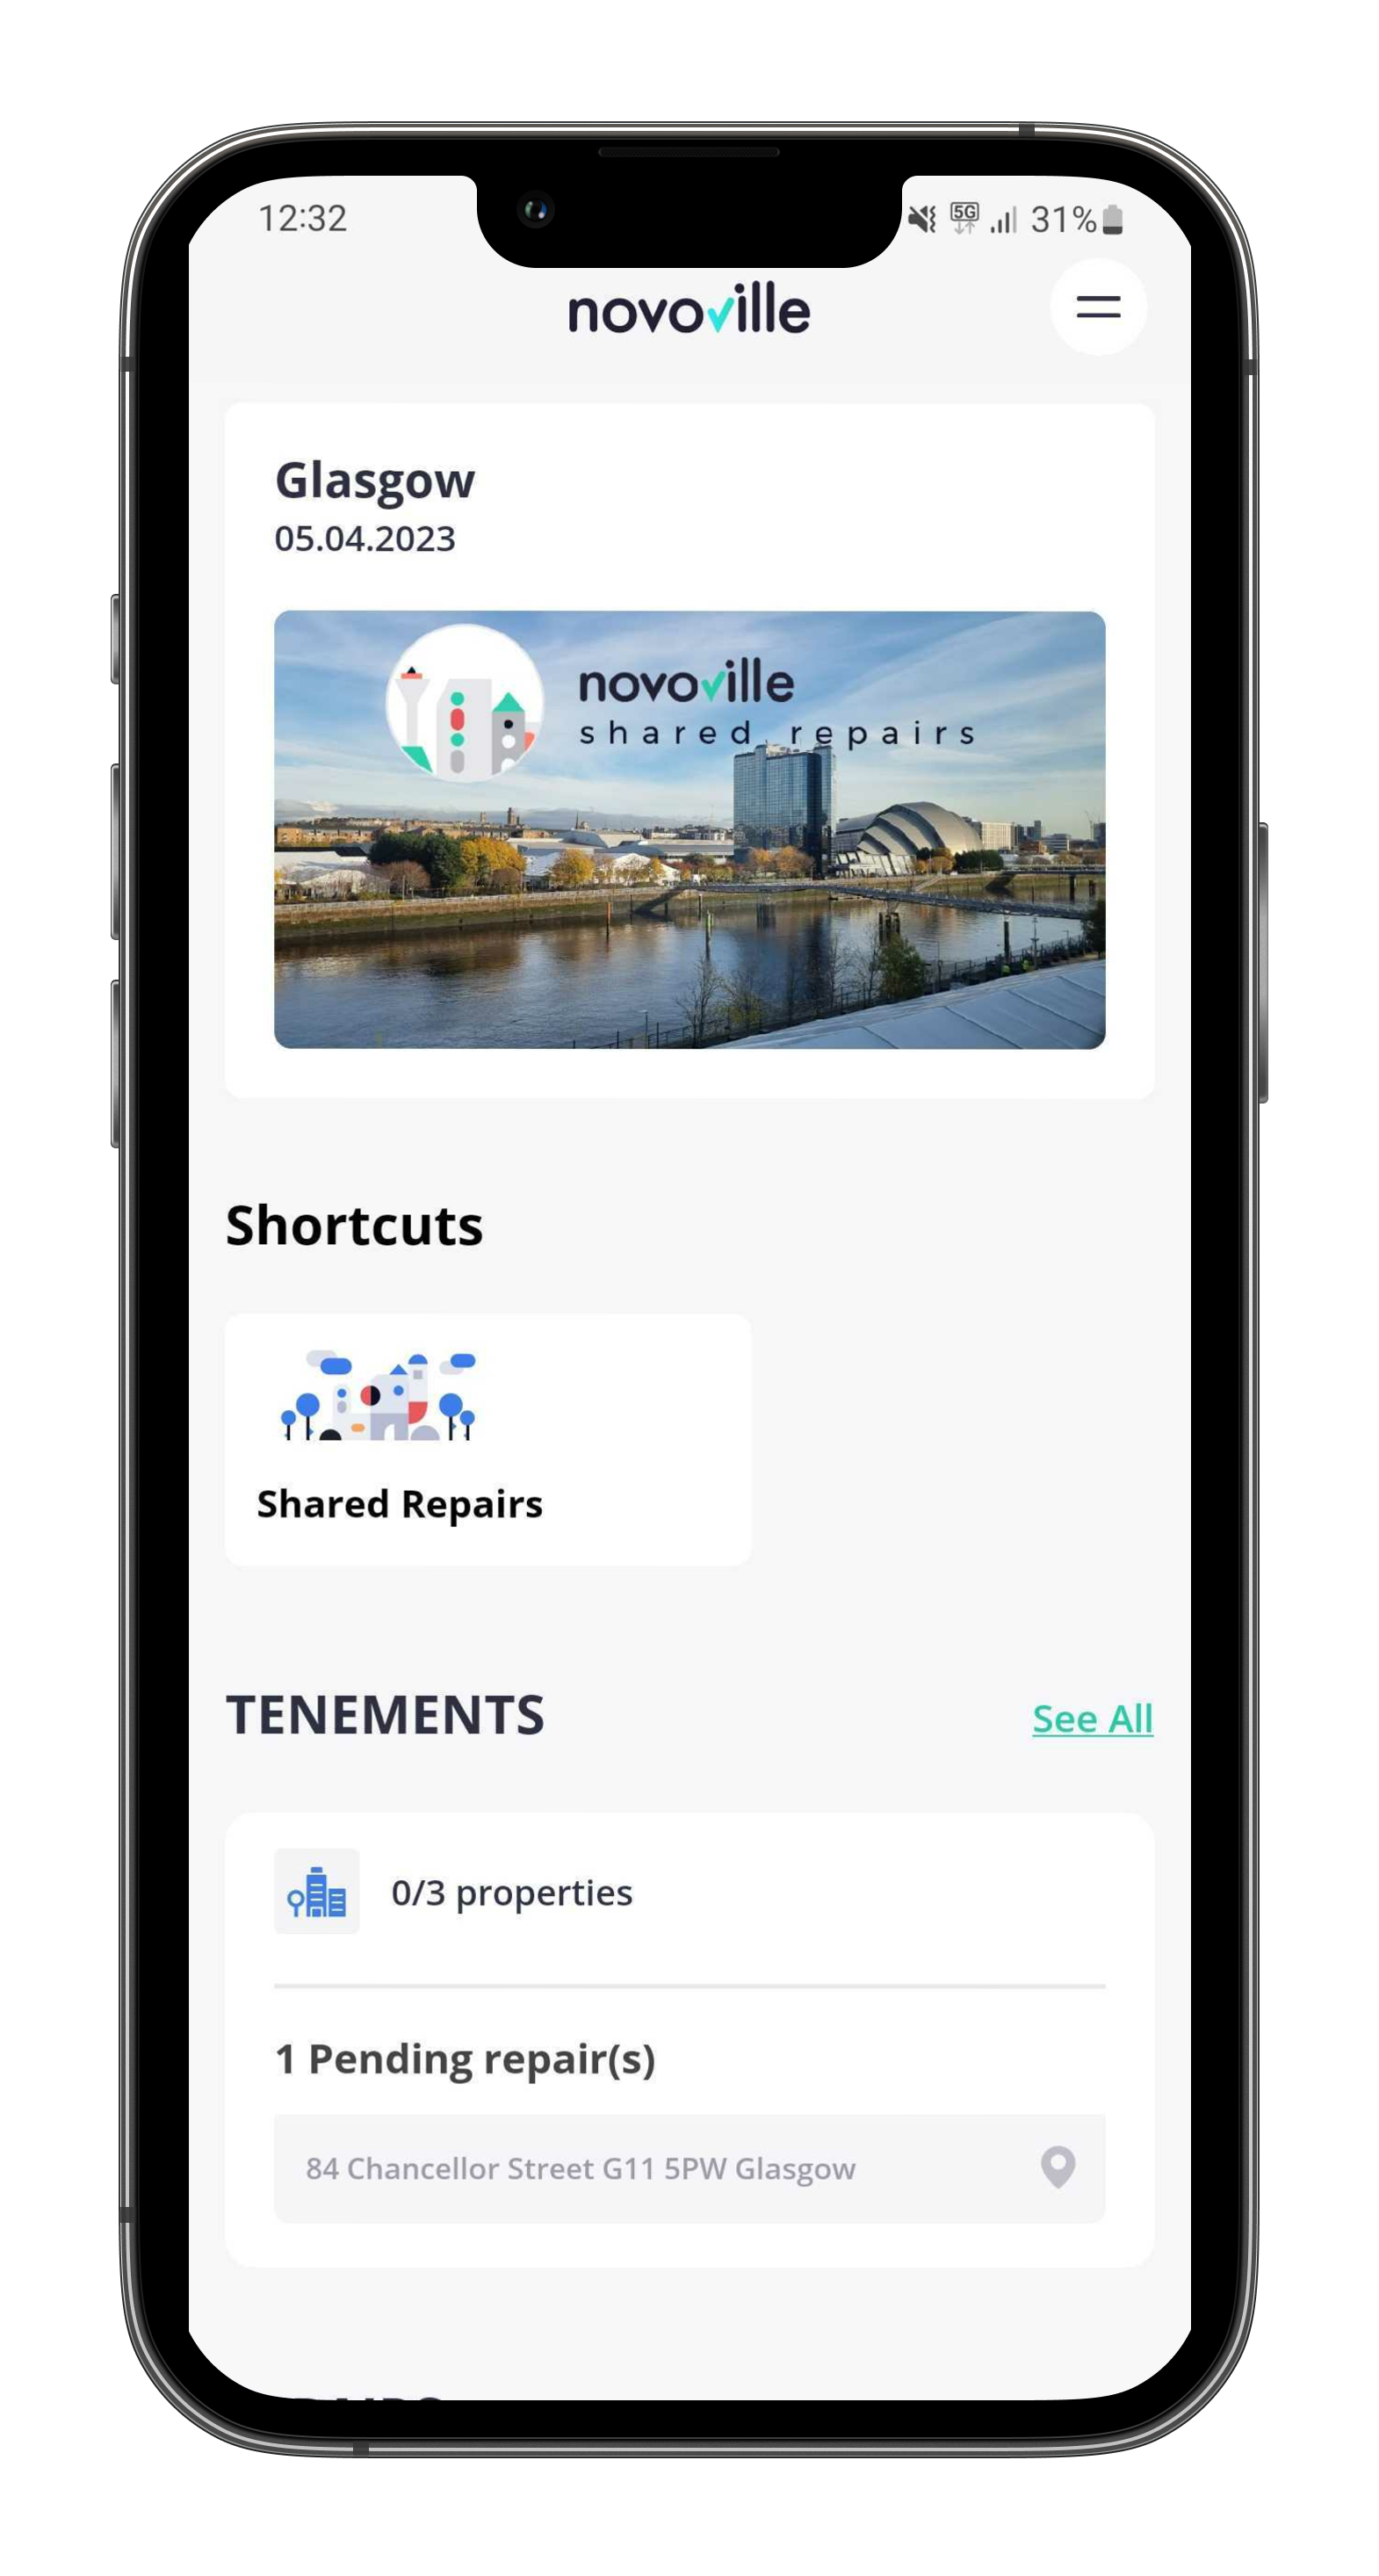 [Press Release] Novoville Shared Repairs is now Live in Glasgow.